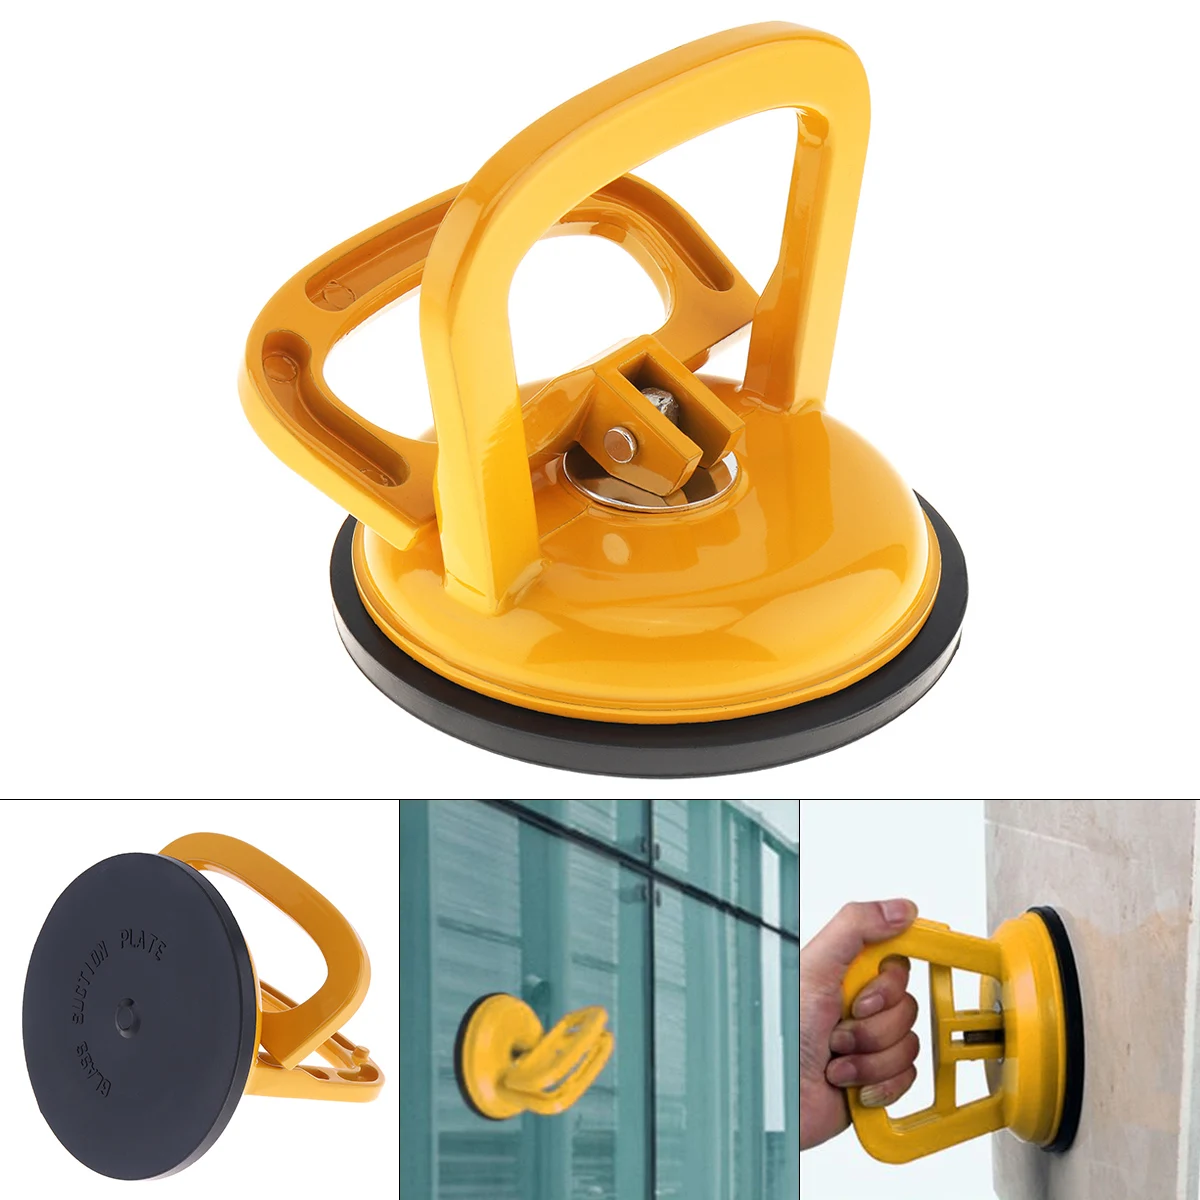 

Single Claw Sucker Vacuum Suction Cup with Rubber Suction Pad and 2 Clip Handles for Tiles / Glass / Lightweight Locking Device